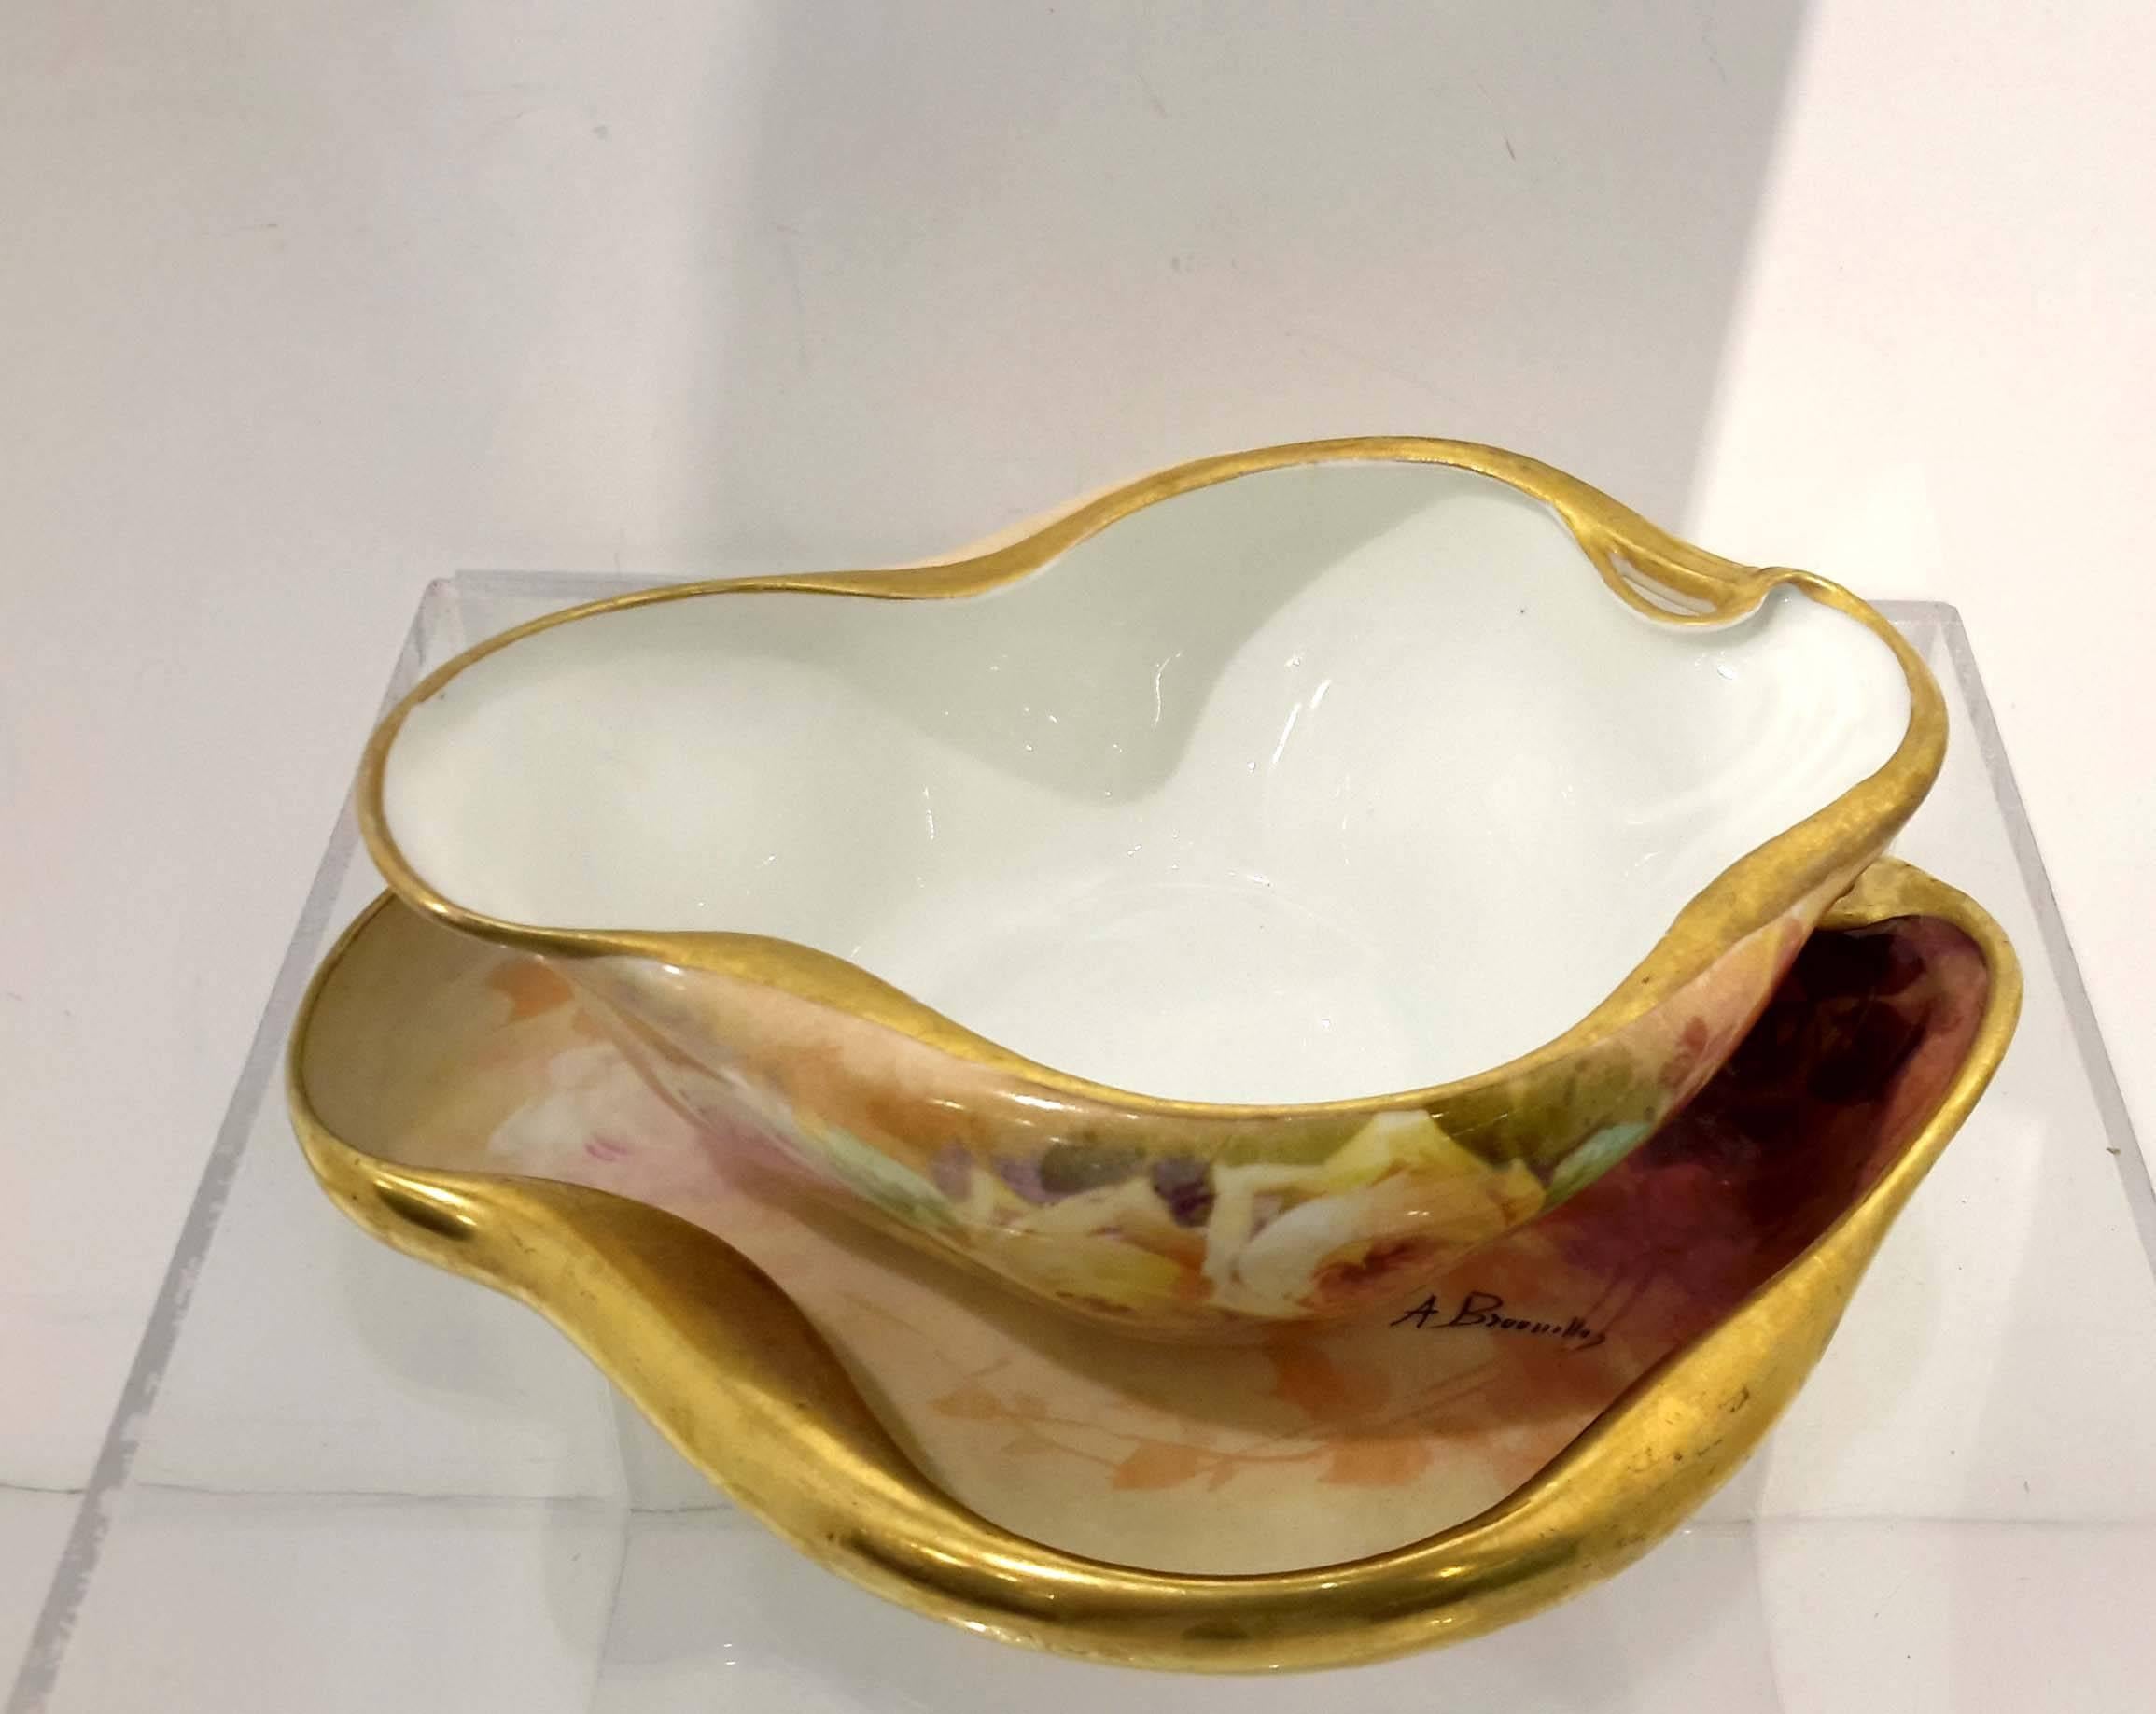 Hand-painted French porcelain signed by artist: A. Bronssillon.
Finger bowl with under plate.
Bowl: High 2 inches, wide 5 3/4 inches, deep 4 1/2 inches
Saucer: High 3/4 inch, wide 6 7/8 inches, deep 5 1/2 inches.